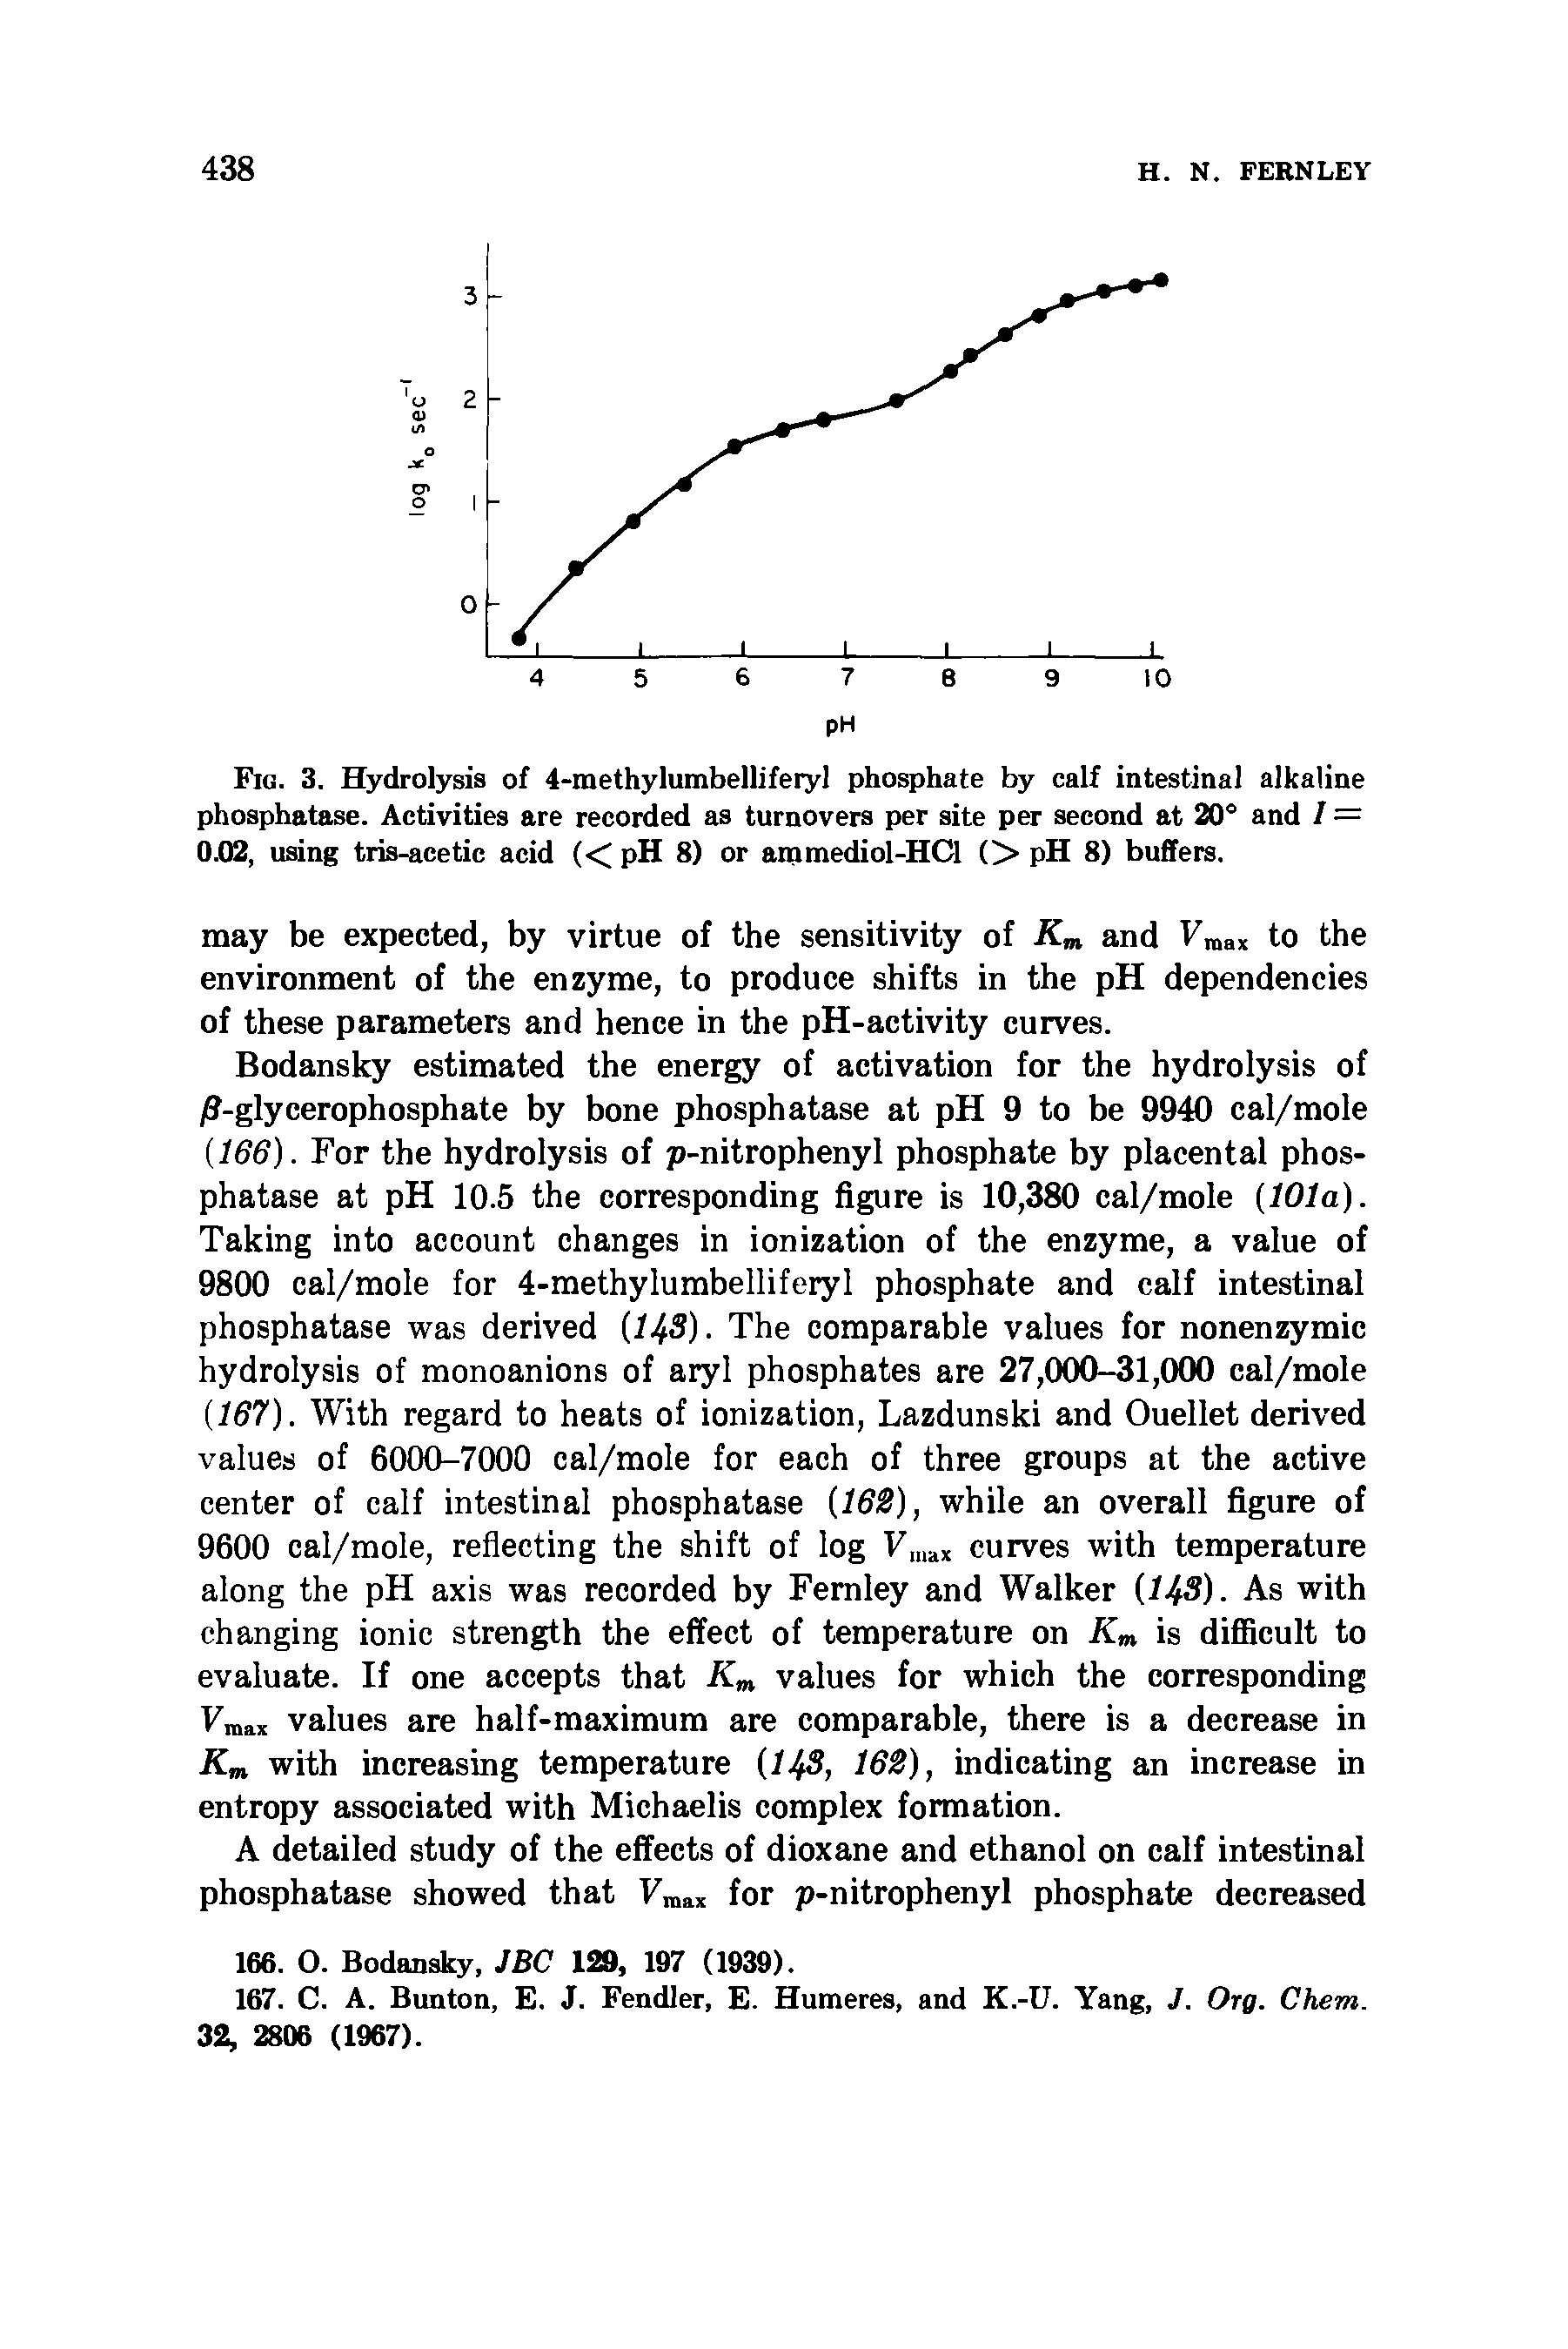 Fig. 3. Hydrolysis of 4-methylumbelliferyl phosphate by calf intestinal alkaline phosphatase. Activities are recorded as turnovers per site per second at 20° and 1 = 0.02, using tris-acetic acid (< pH 8) or ammediol-HCl (> pH 8) buffers.